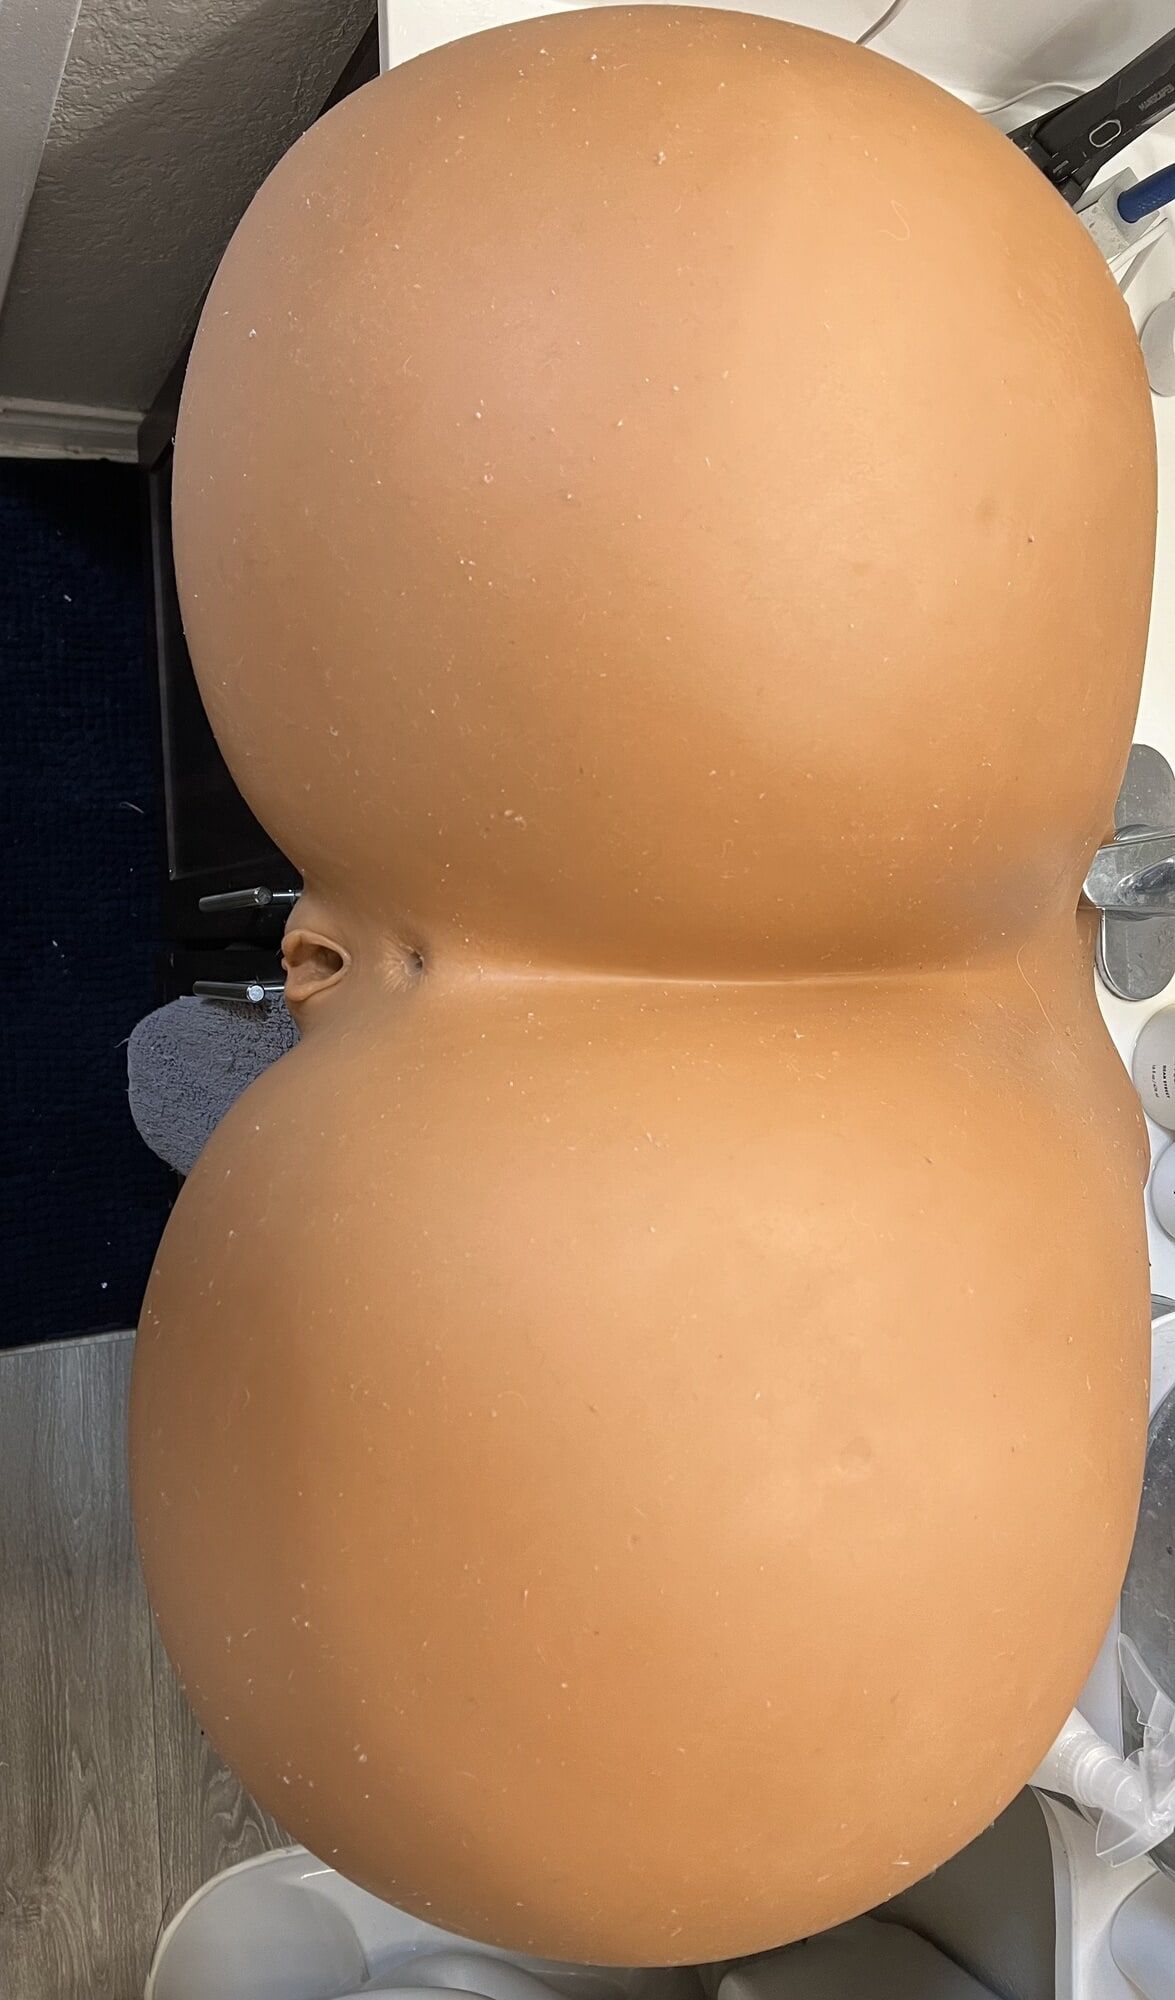 Showing Off the Immense Ass of the R3 CLM Sexdoll